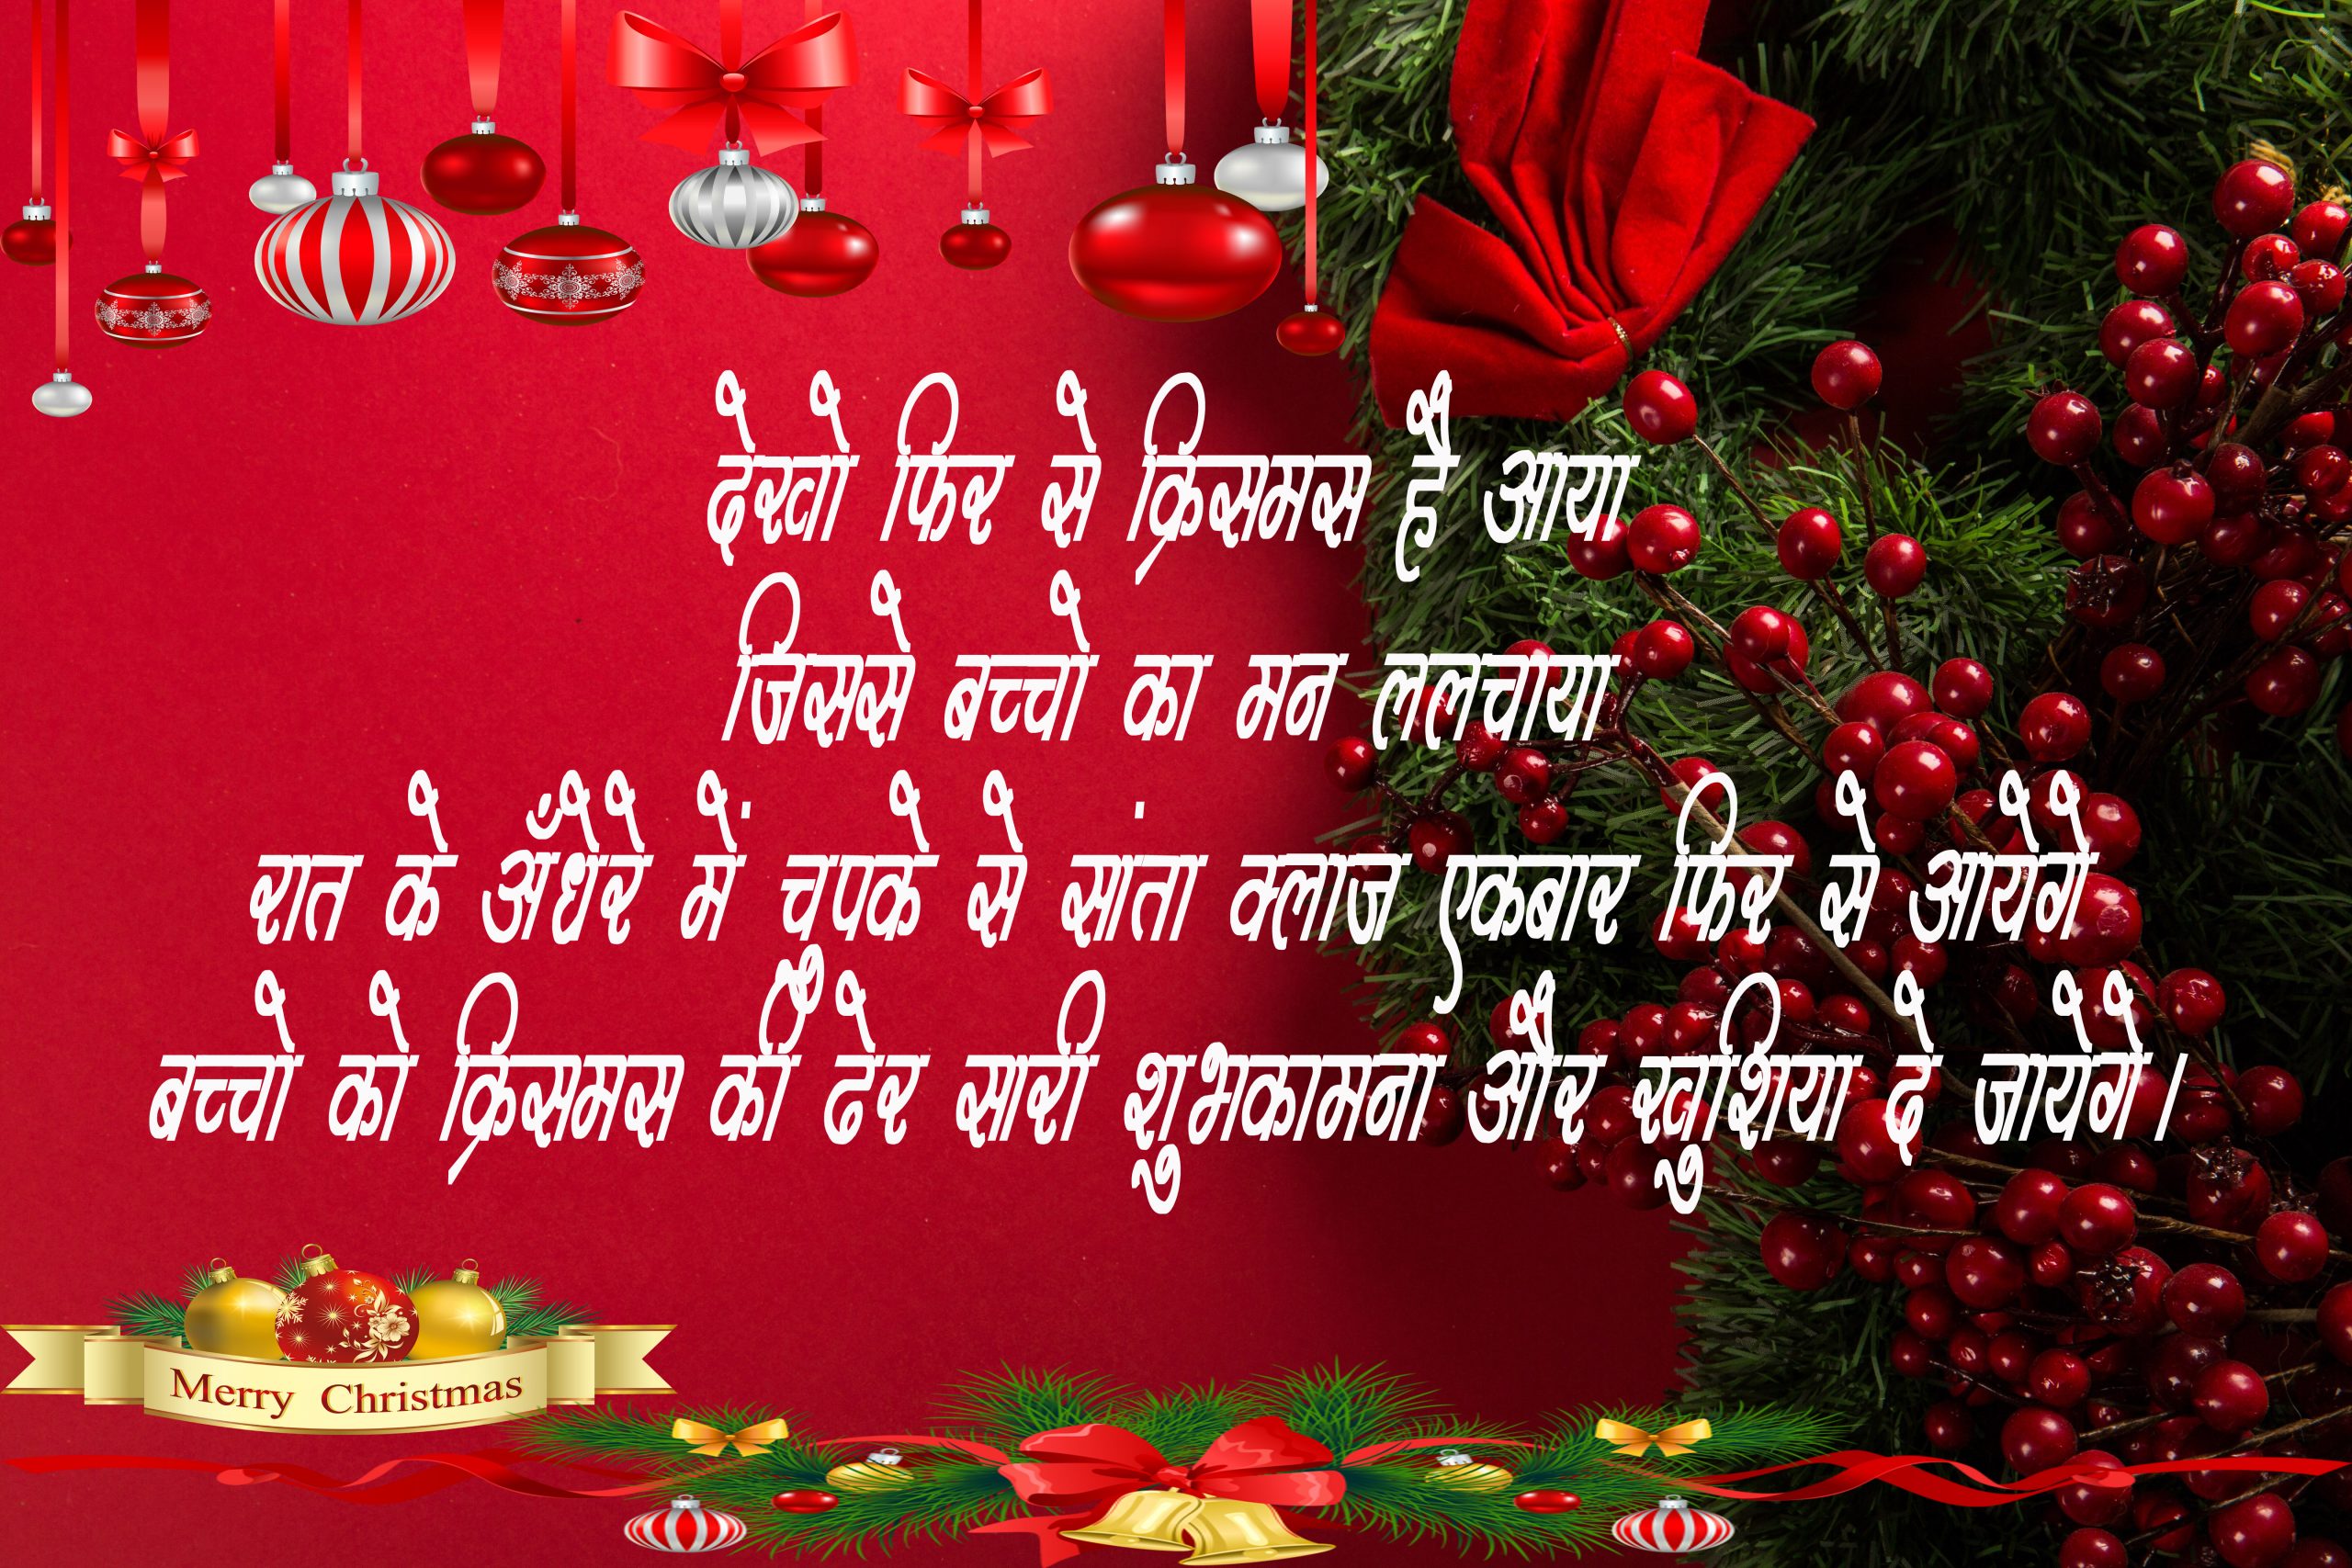 Merry Christmas Wishes Messages in Hindi